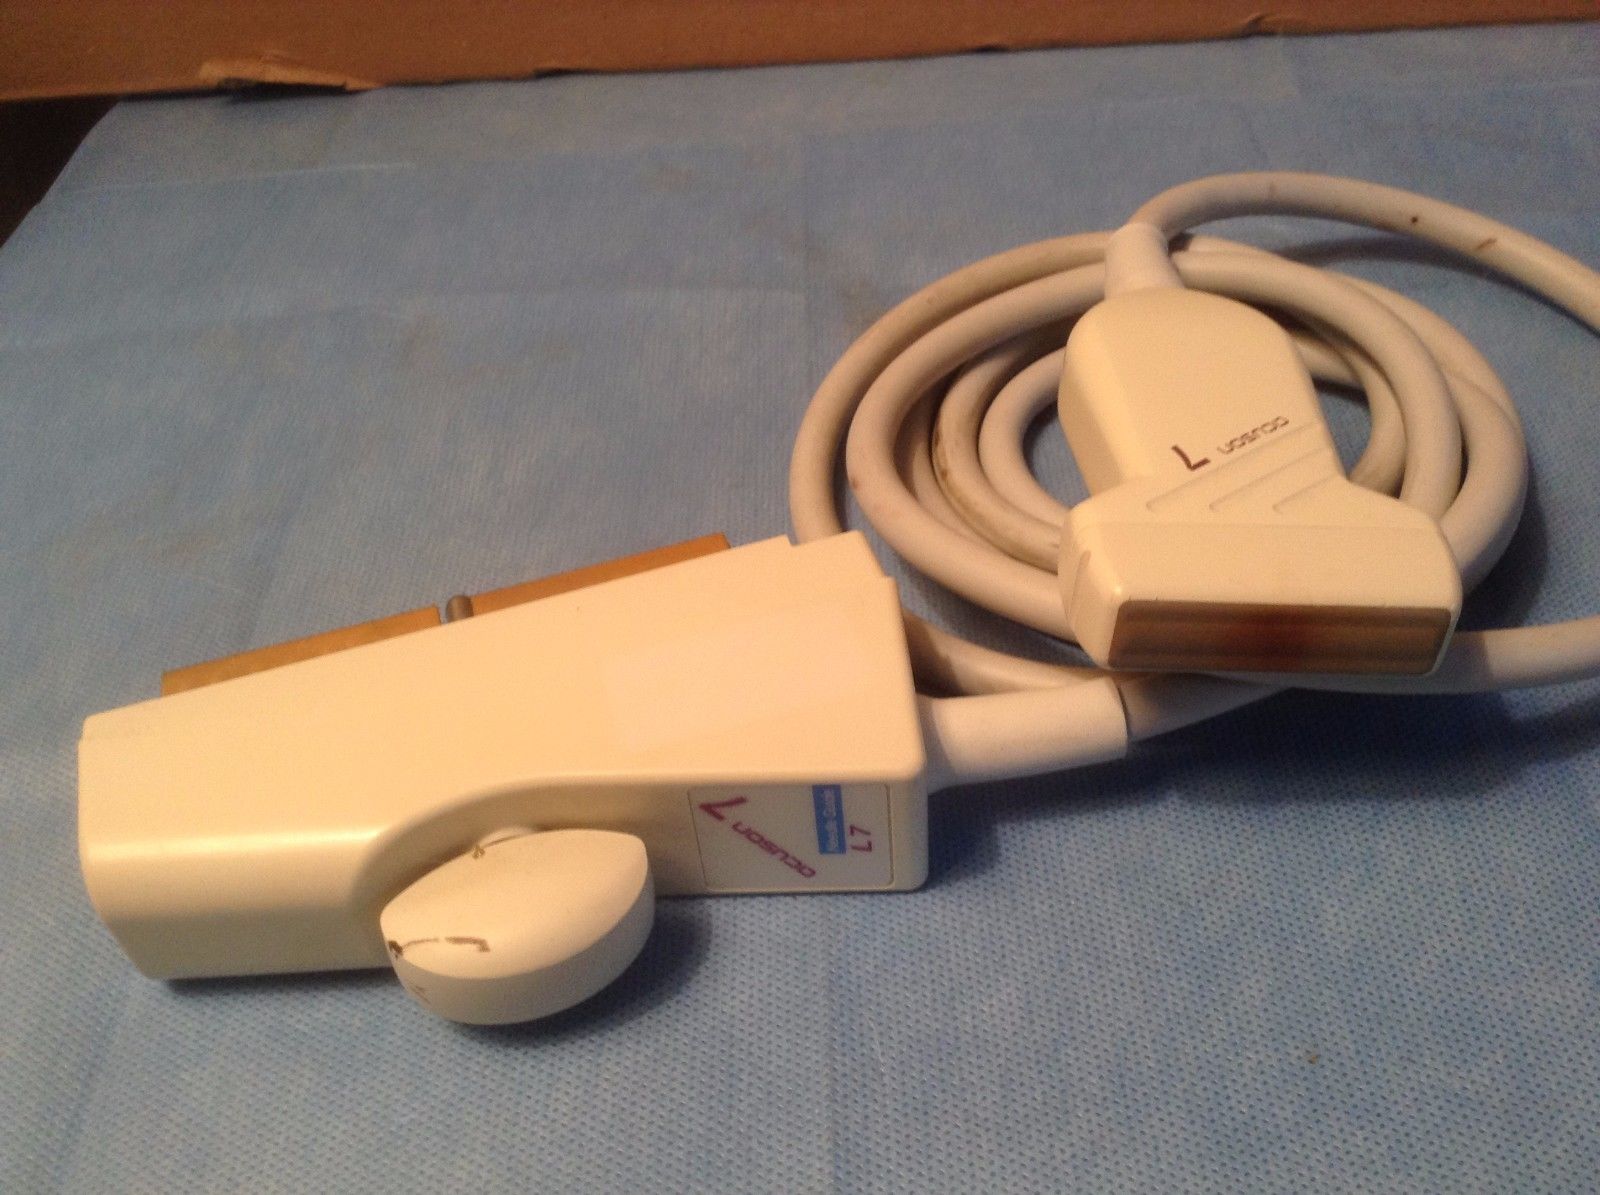 ACUSON ULTRASOUND PROBE L7 FROM WORKING ENVIRONMENT GOOD CONDITION CLEAN DIAGNOSTIC ULTRASOUND MACHINES FOR SALE